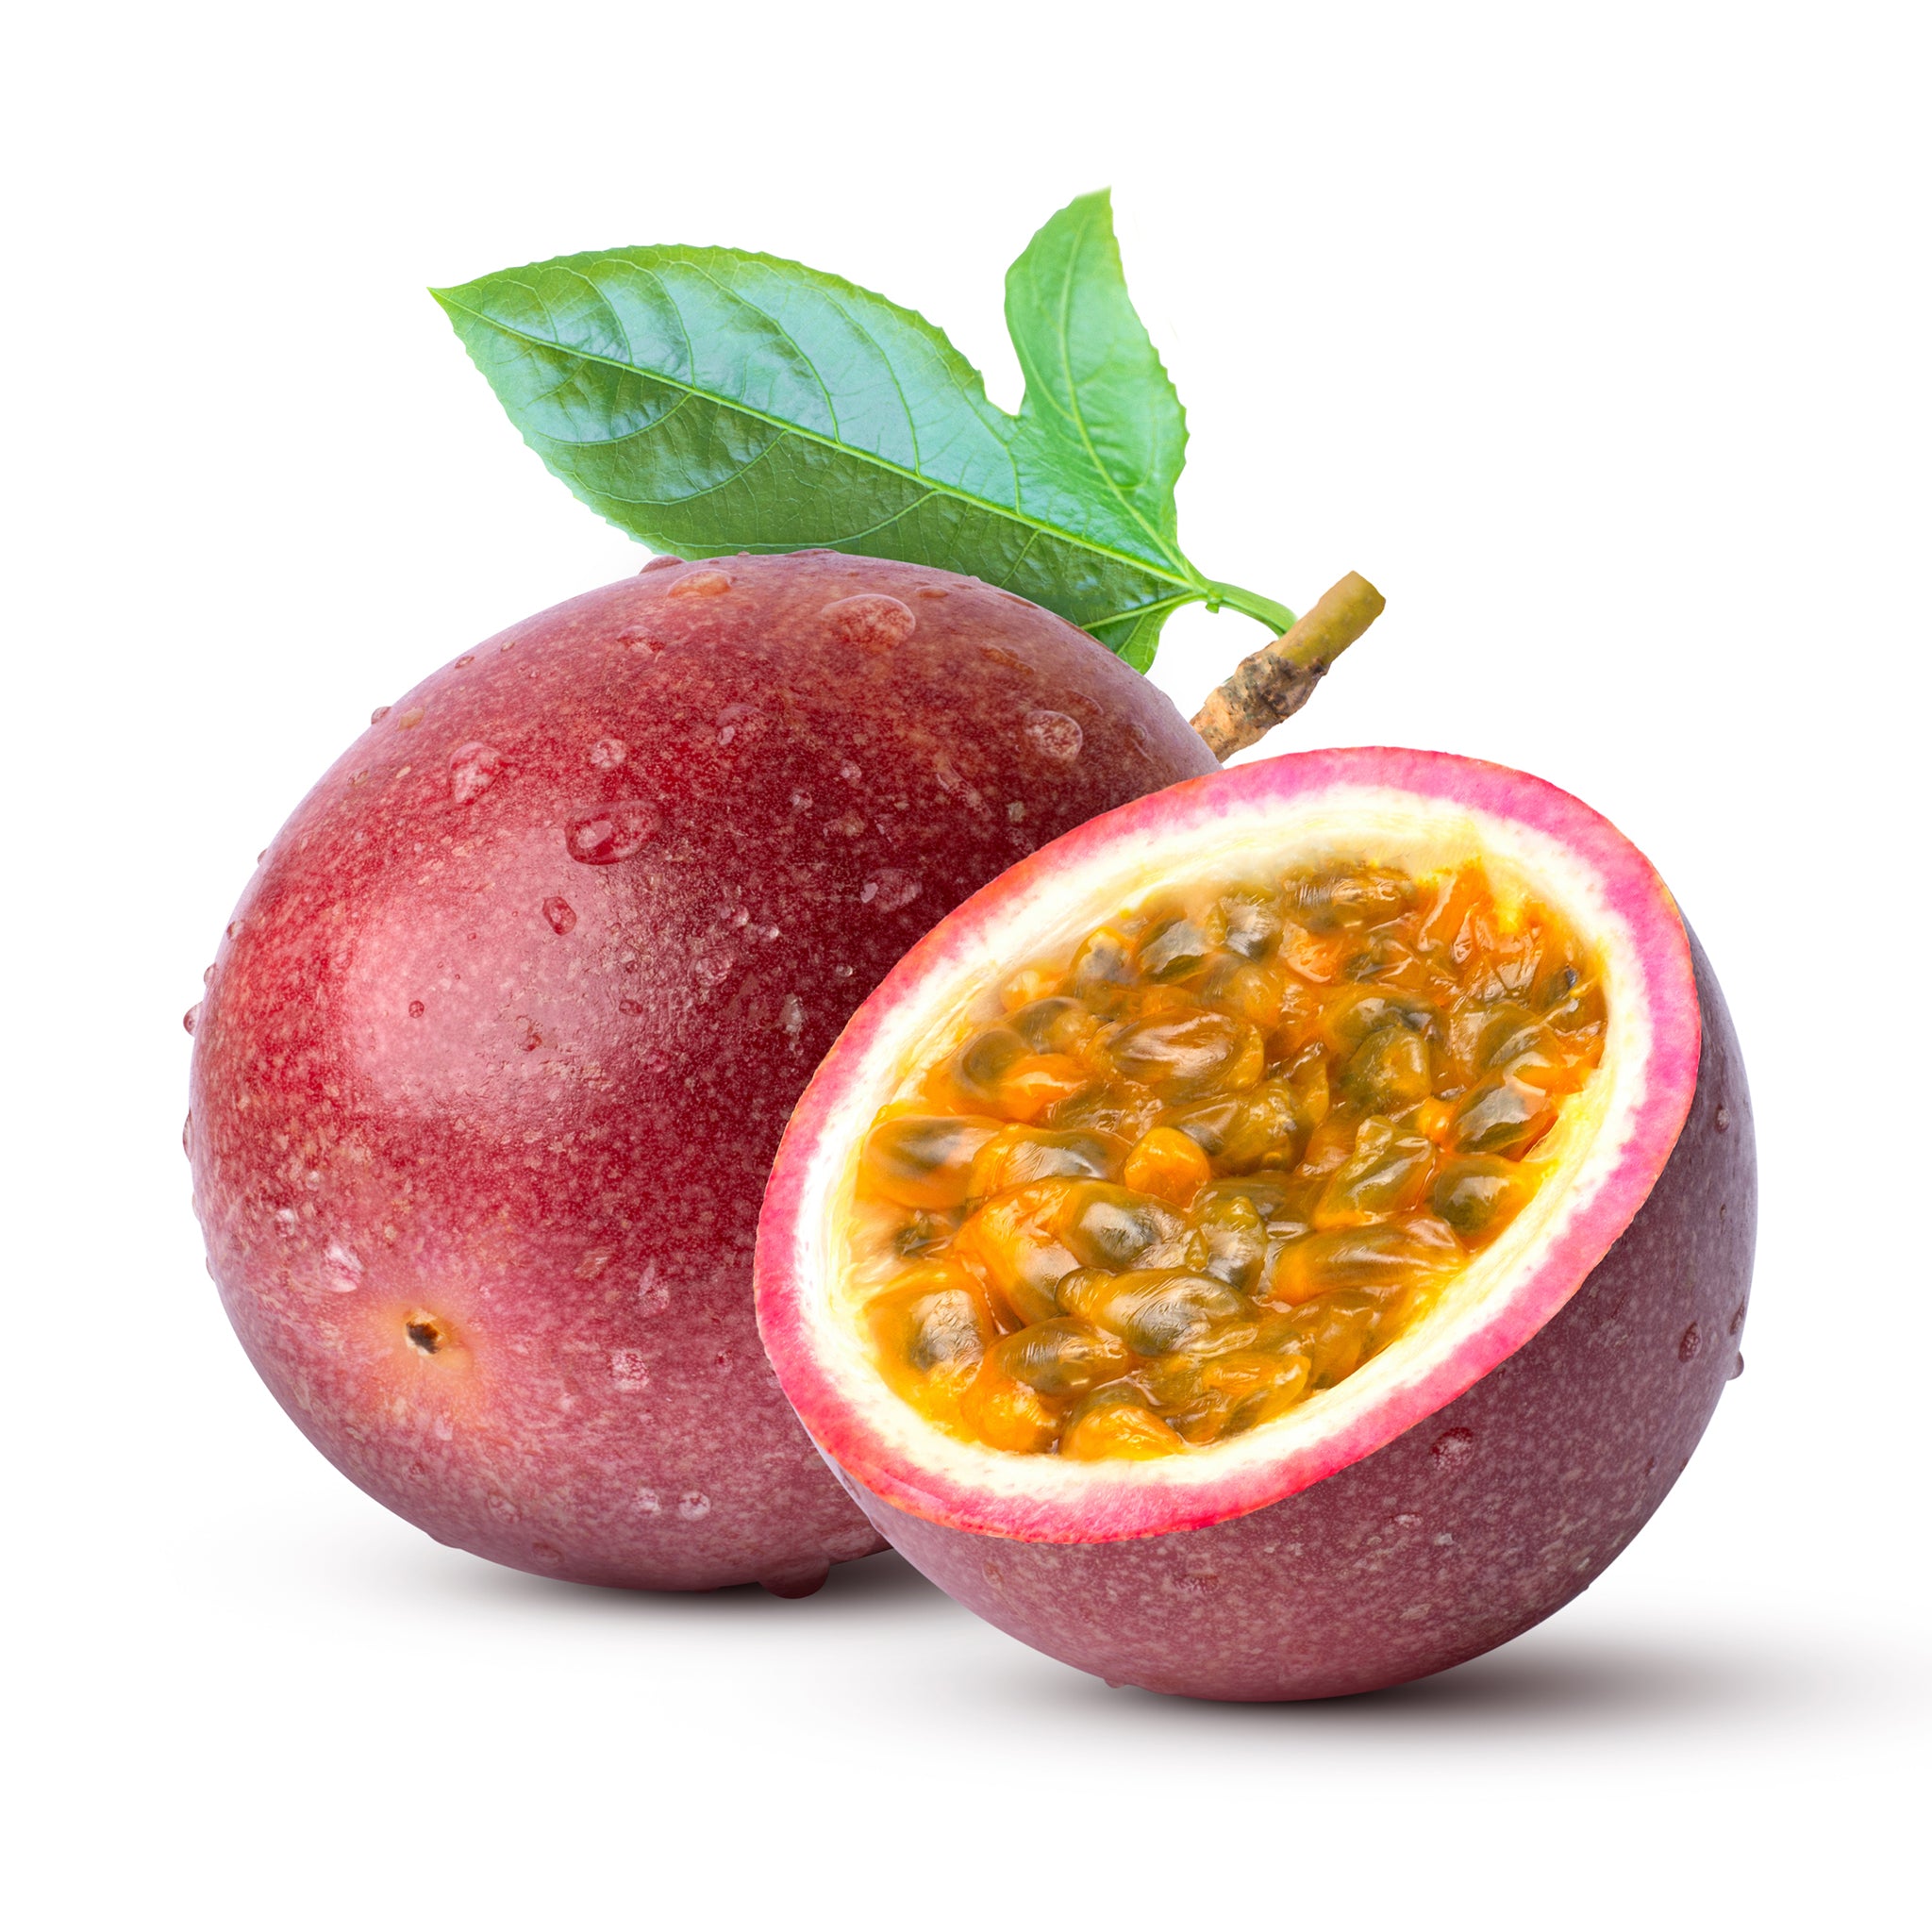 Skin care with passion fruit extract.